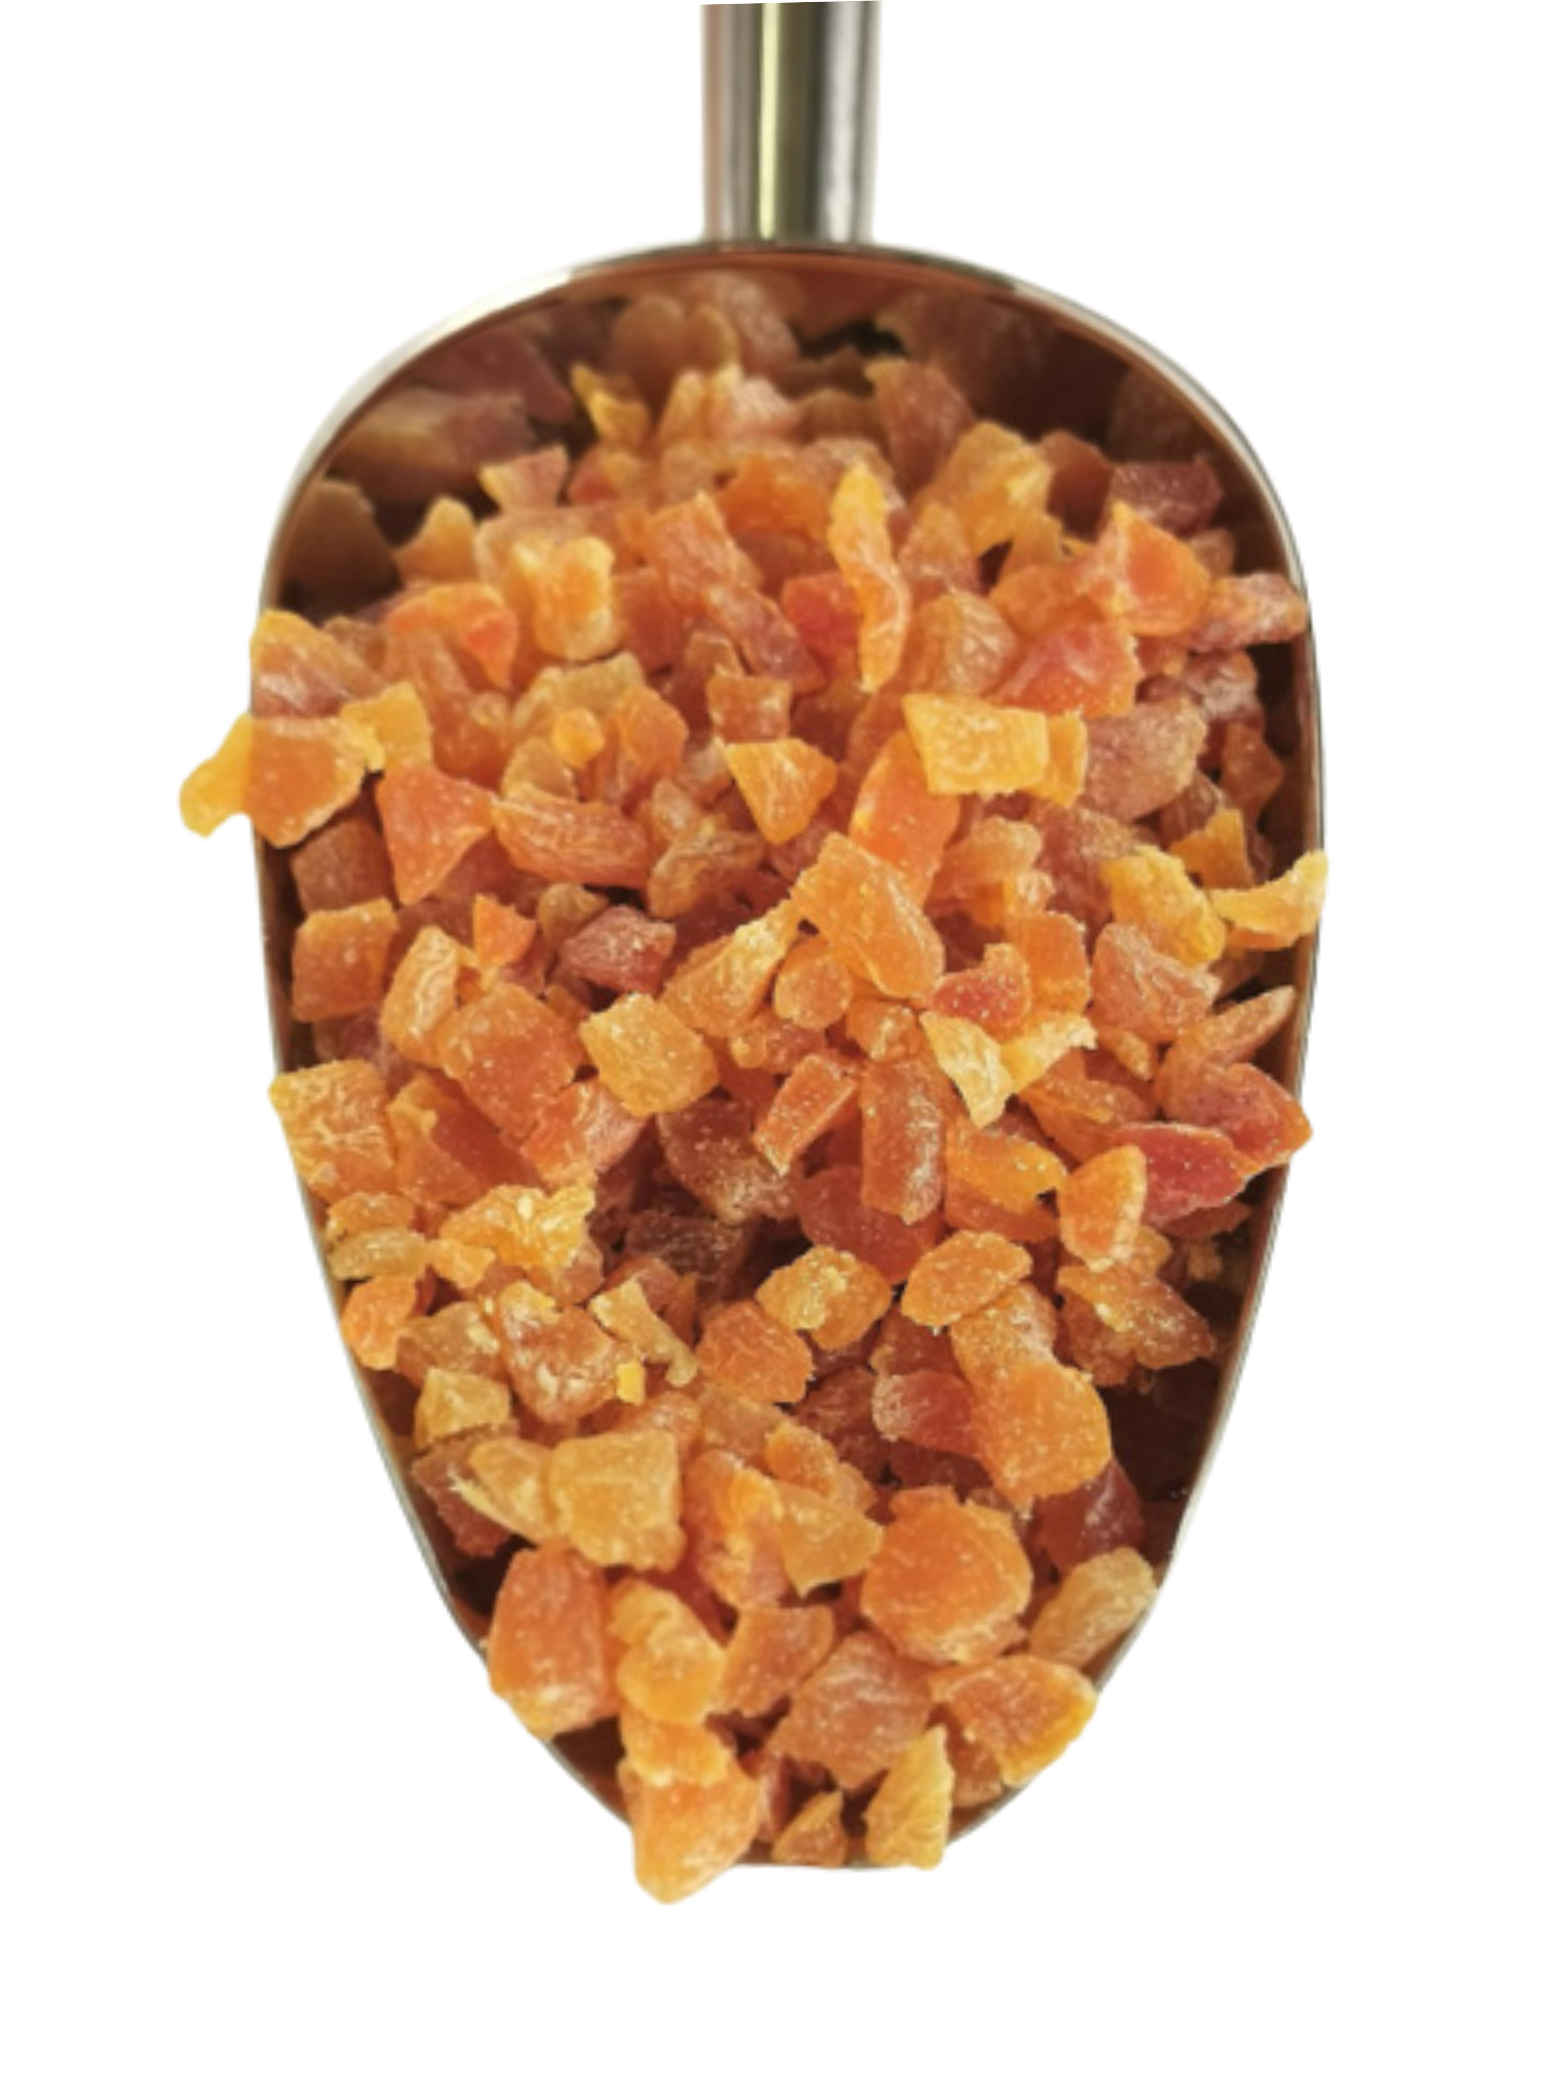 Apricots diced